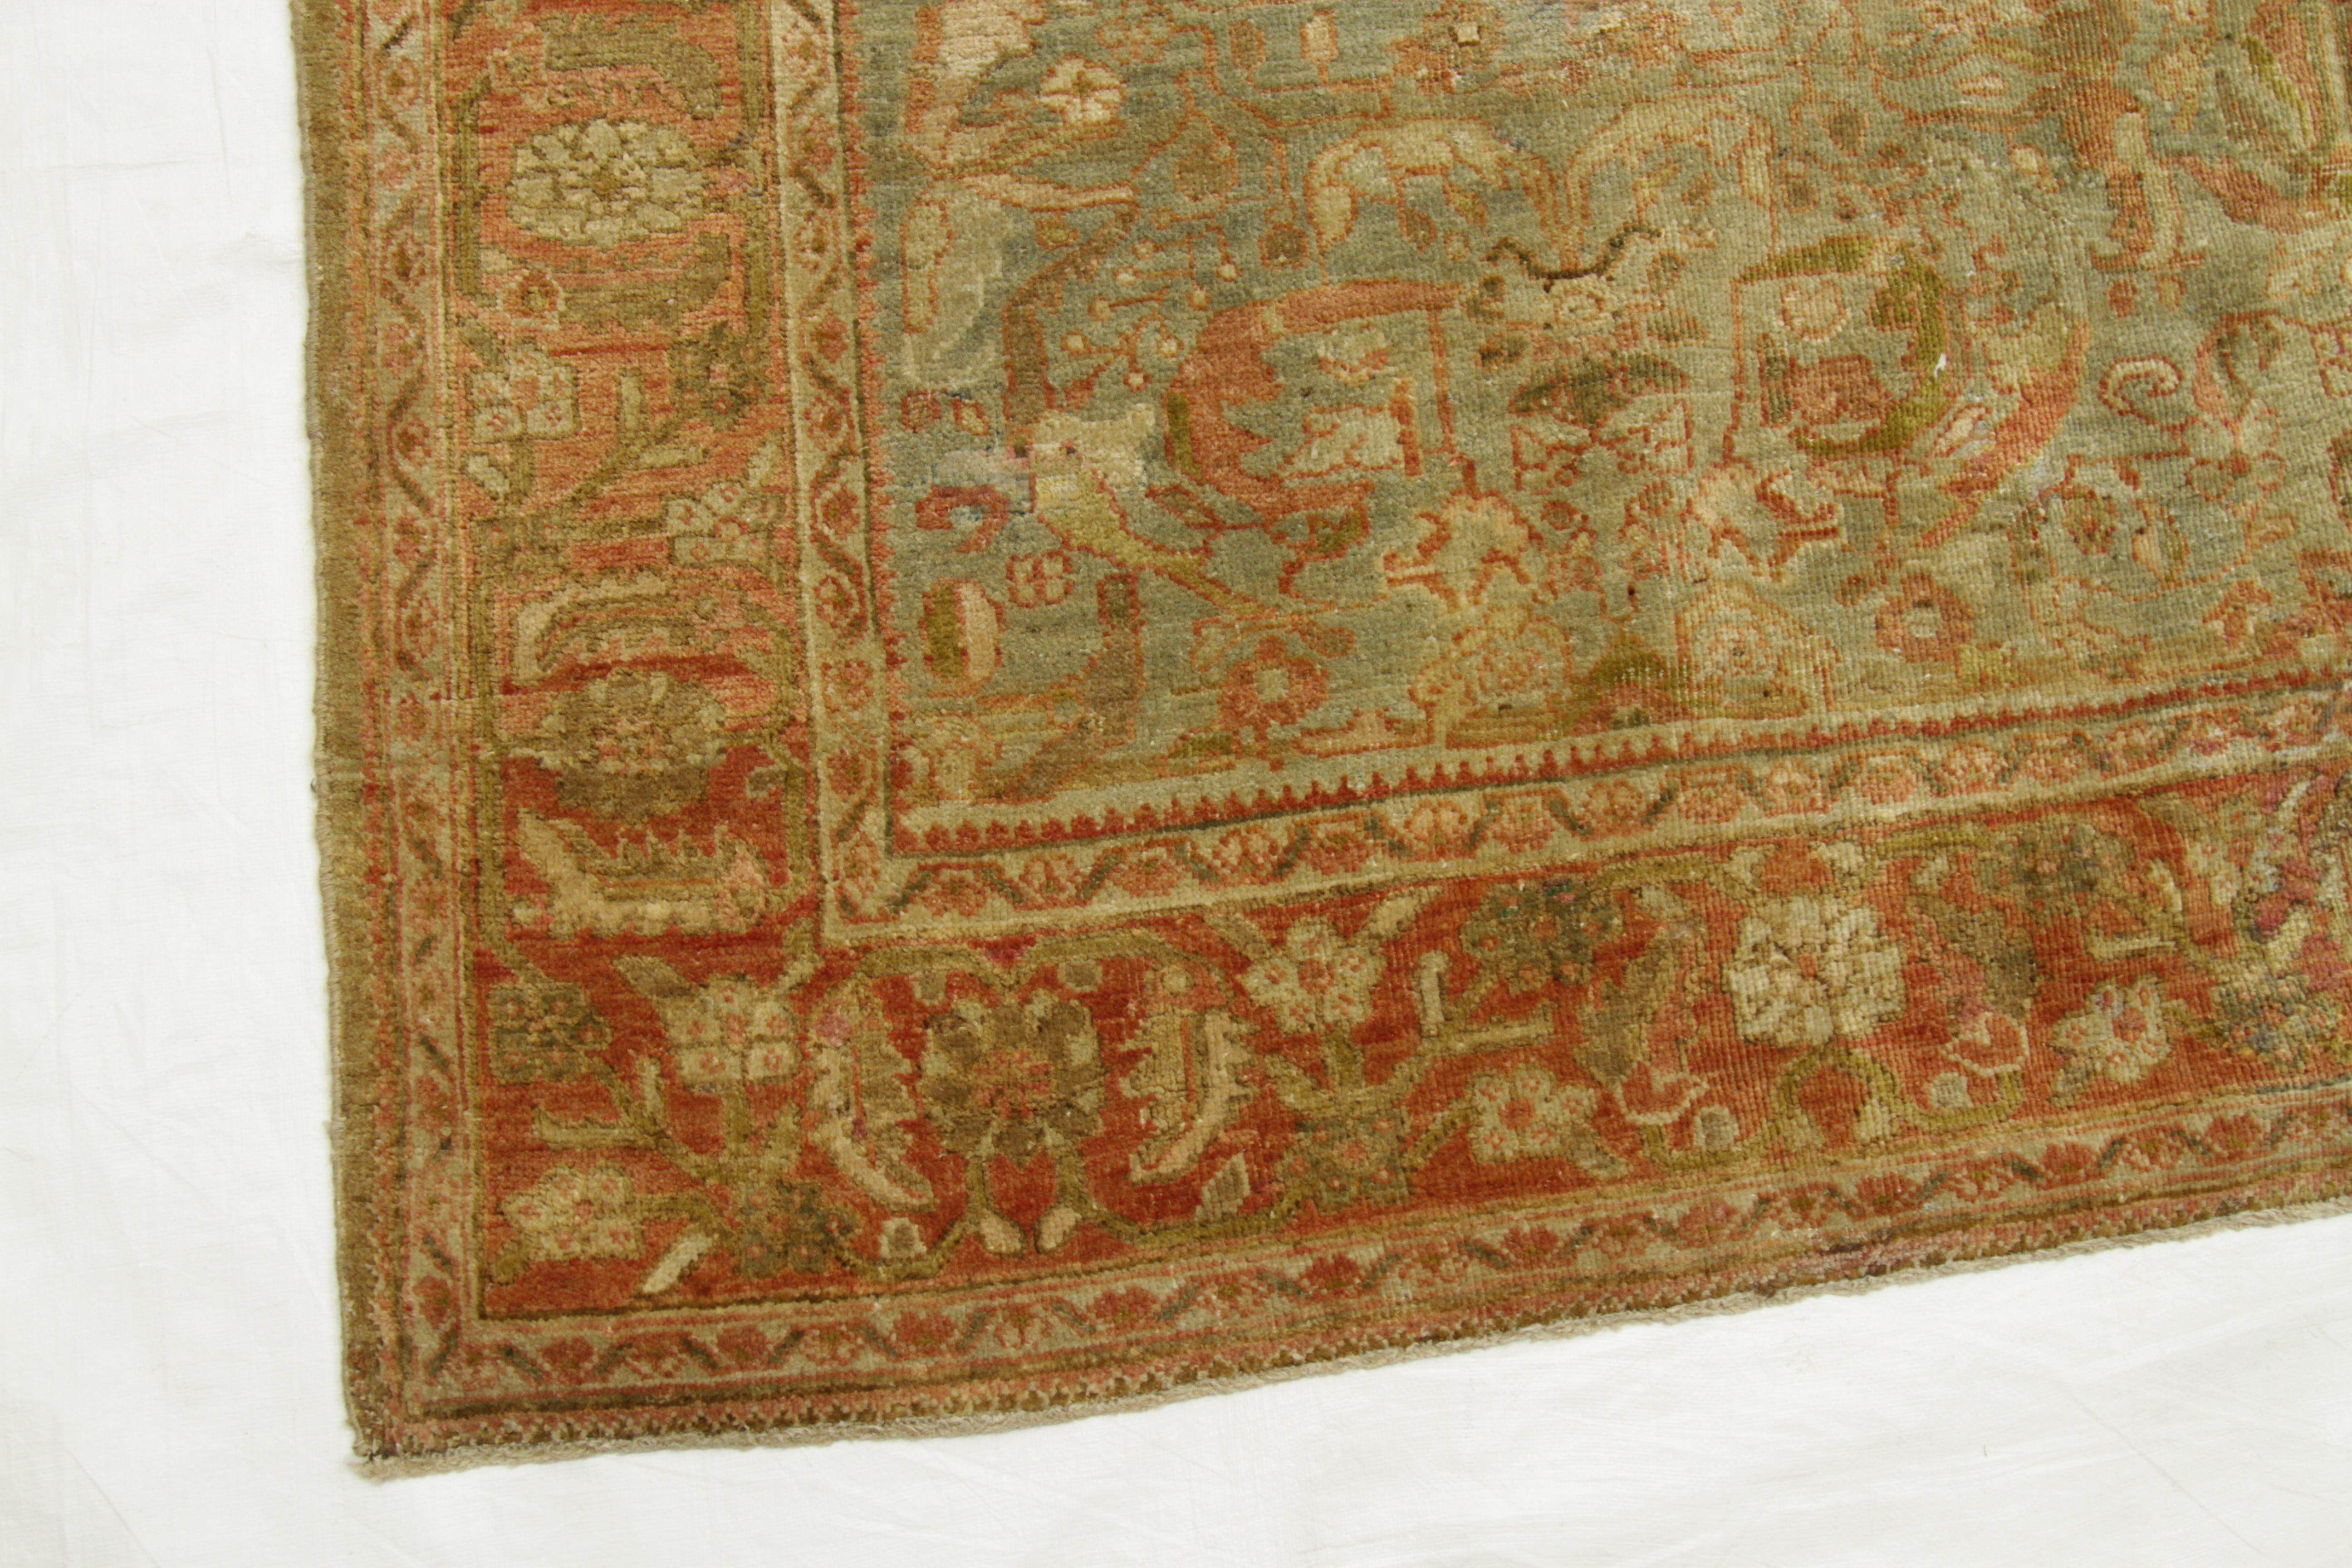 1930s Antique Persian Rug Malayer Design with Sultry Red and Brown Floral Motif For Sale 3